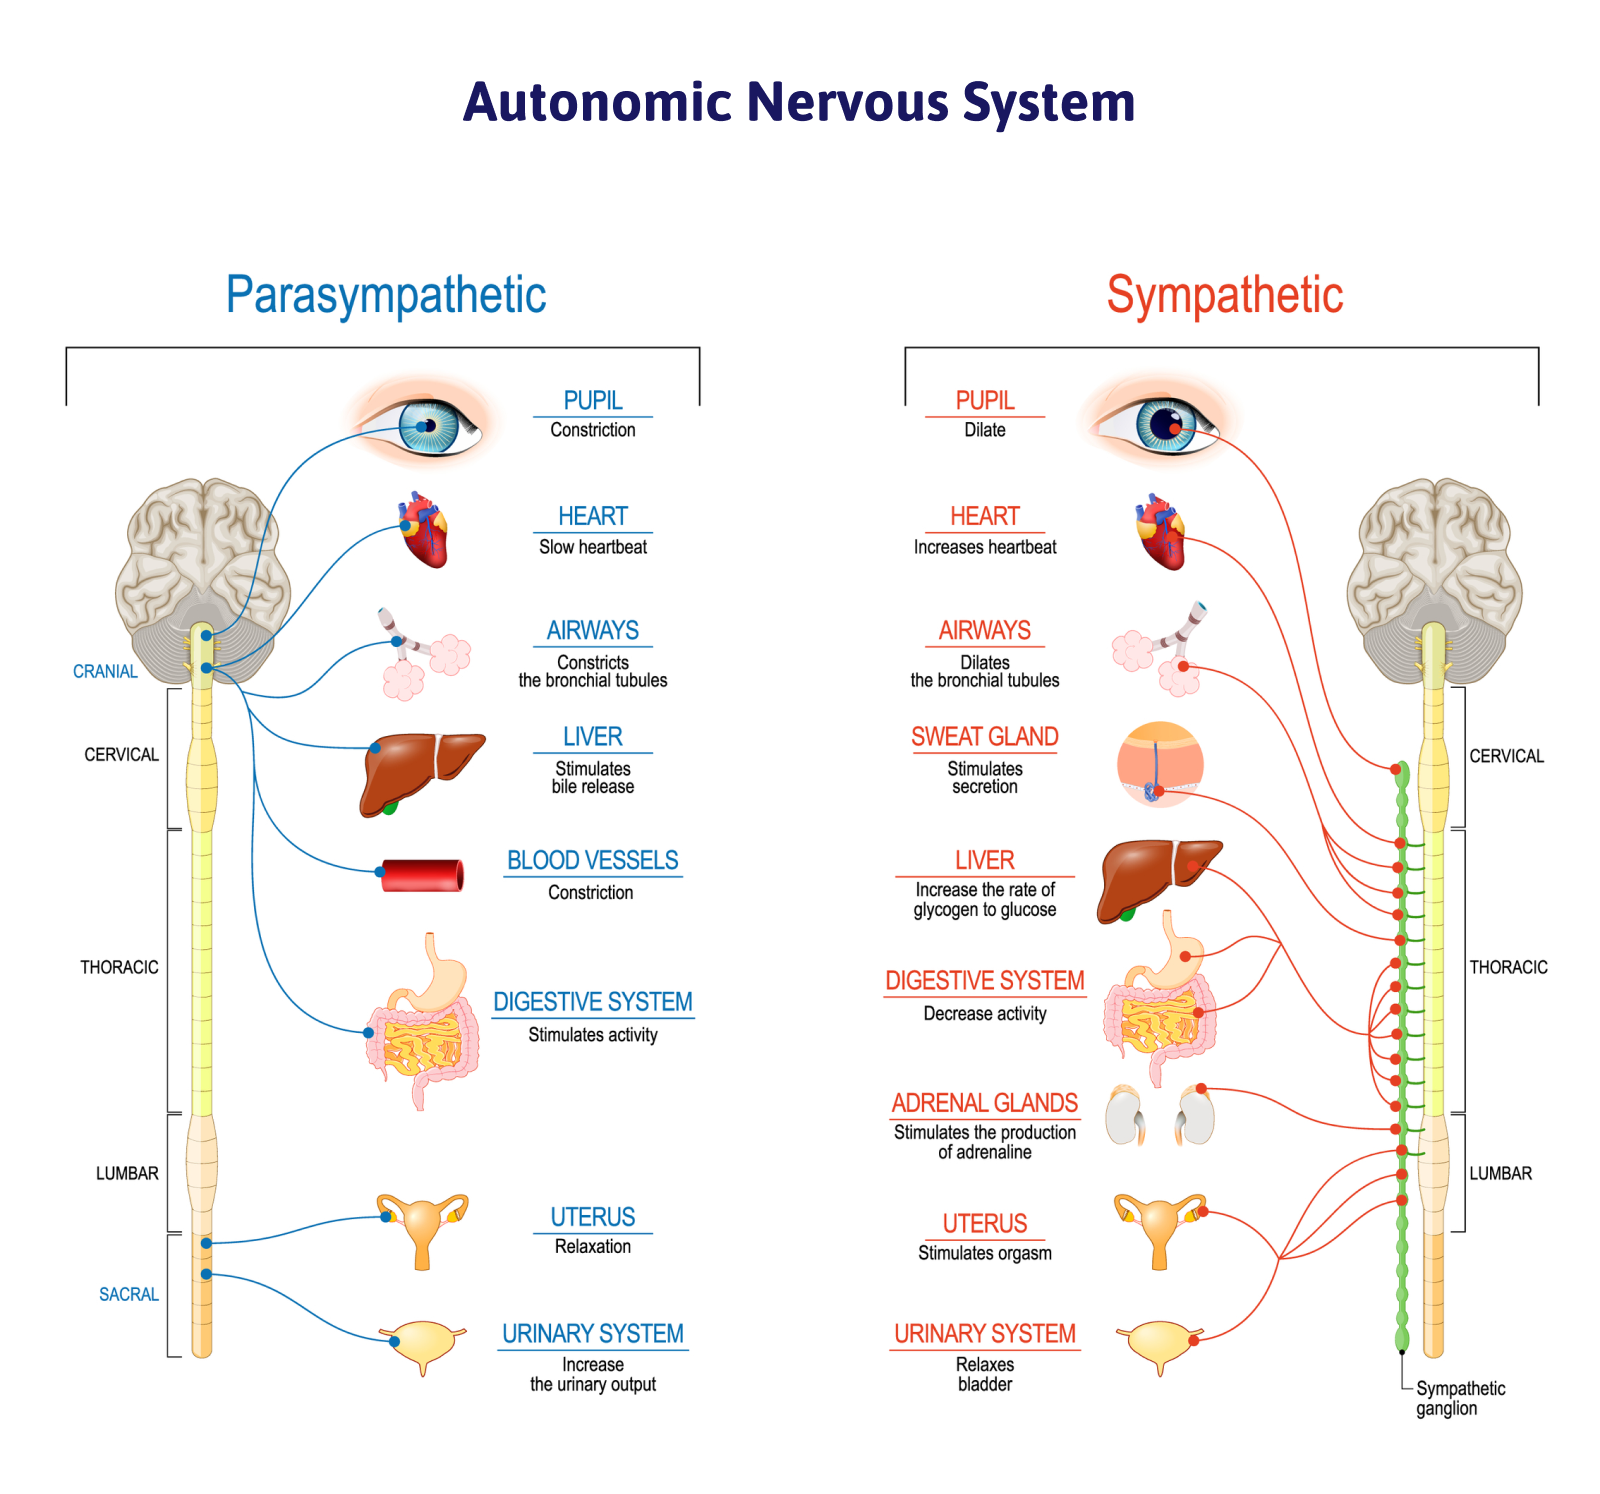 This diagram shows how the parasympathetic and sympathetic nervous systems affect various bodily functions. 